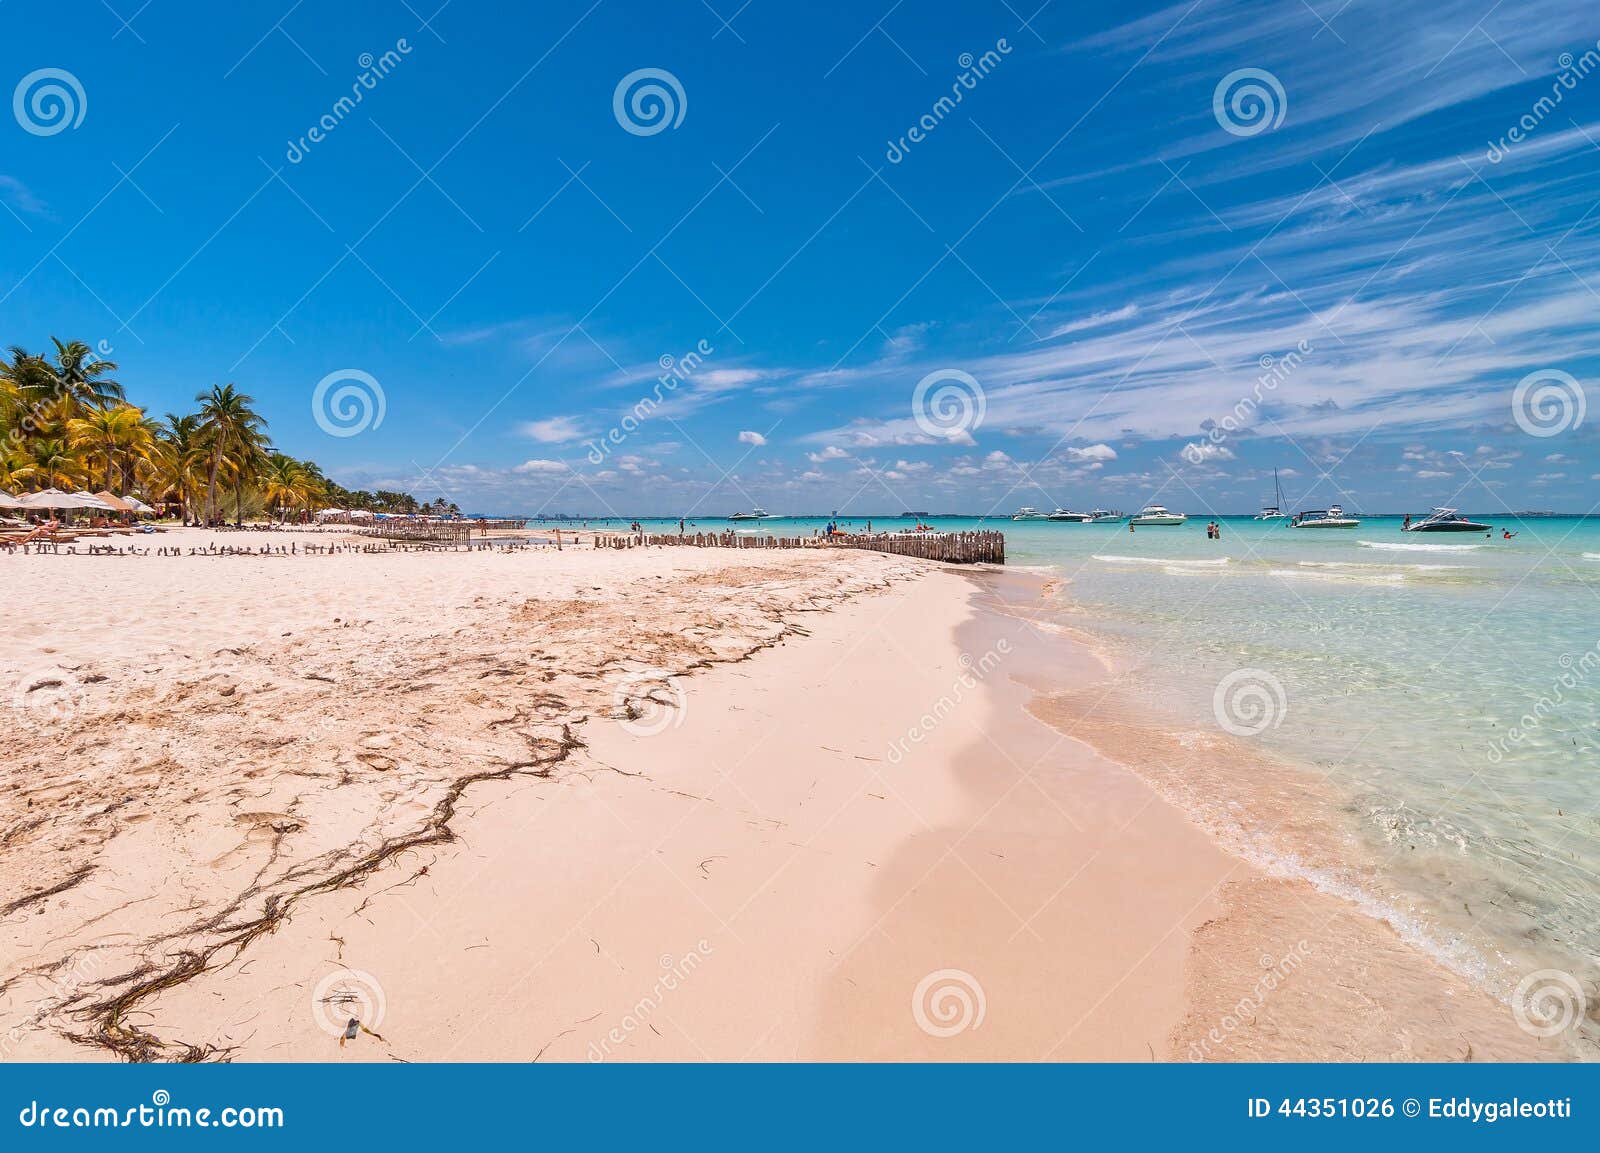 tropical beach in isla mujeres, mexico